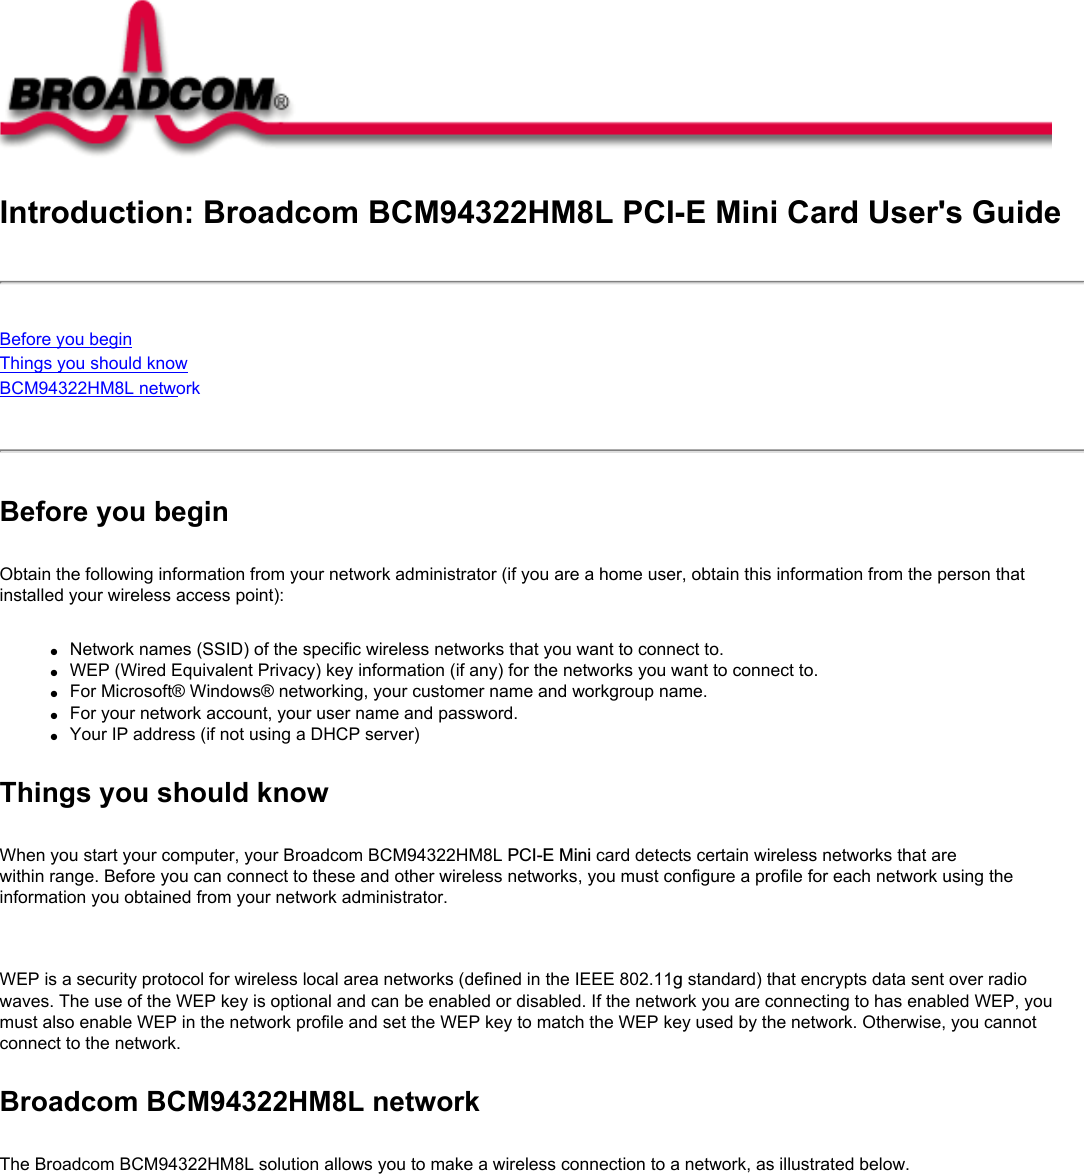 Introduction: Broadcom BCM94322HM8L PCI-E Mini Card User&apos;s GuideBefore you beginThings you should knowBCM94322HM8L network Before you beginObtain the following information from your network administrator (if you are a home user, obtain this information from the person that installed your wireless access point):●     Network names (SSID) of the specific wireless networks that you want to connect to.●     WEP (Wired Equivalent Privacy) key information (if any) for the networks you want to connect to.●     For Microsoft® Windows® networking, your customer name and workgroup name.●     For your network account, your user name and password.●     Your IP address (if not using a DHCP server)Things you should knowWhen you start your computer, your Broadcom BCM94322HM8L PCI-E Mini card detects certain wireless networks that are within range. Before you can connect to these and other wireless networks, you must configure a profile for each network using the information you obtained from your network administrator.   WEP is a security protocol for wireless local area networks (defined in the IEEE 802.11g standard) that encrypts data sent over radio waves. The use of the WEP key is optional and can be enabled or disabled. If the network you are connecting to has enabled WEP, you must also enable WEP in the network profile and set the WEP key to match the WEP key used by the network. Otherwise, you cannot connect to the network.Broadcom BCM94322HM8L networkThe Broadcom BCM94322HM8L solution allows you to make a wireless connection to a network, as illustrated below.